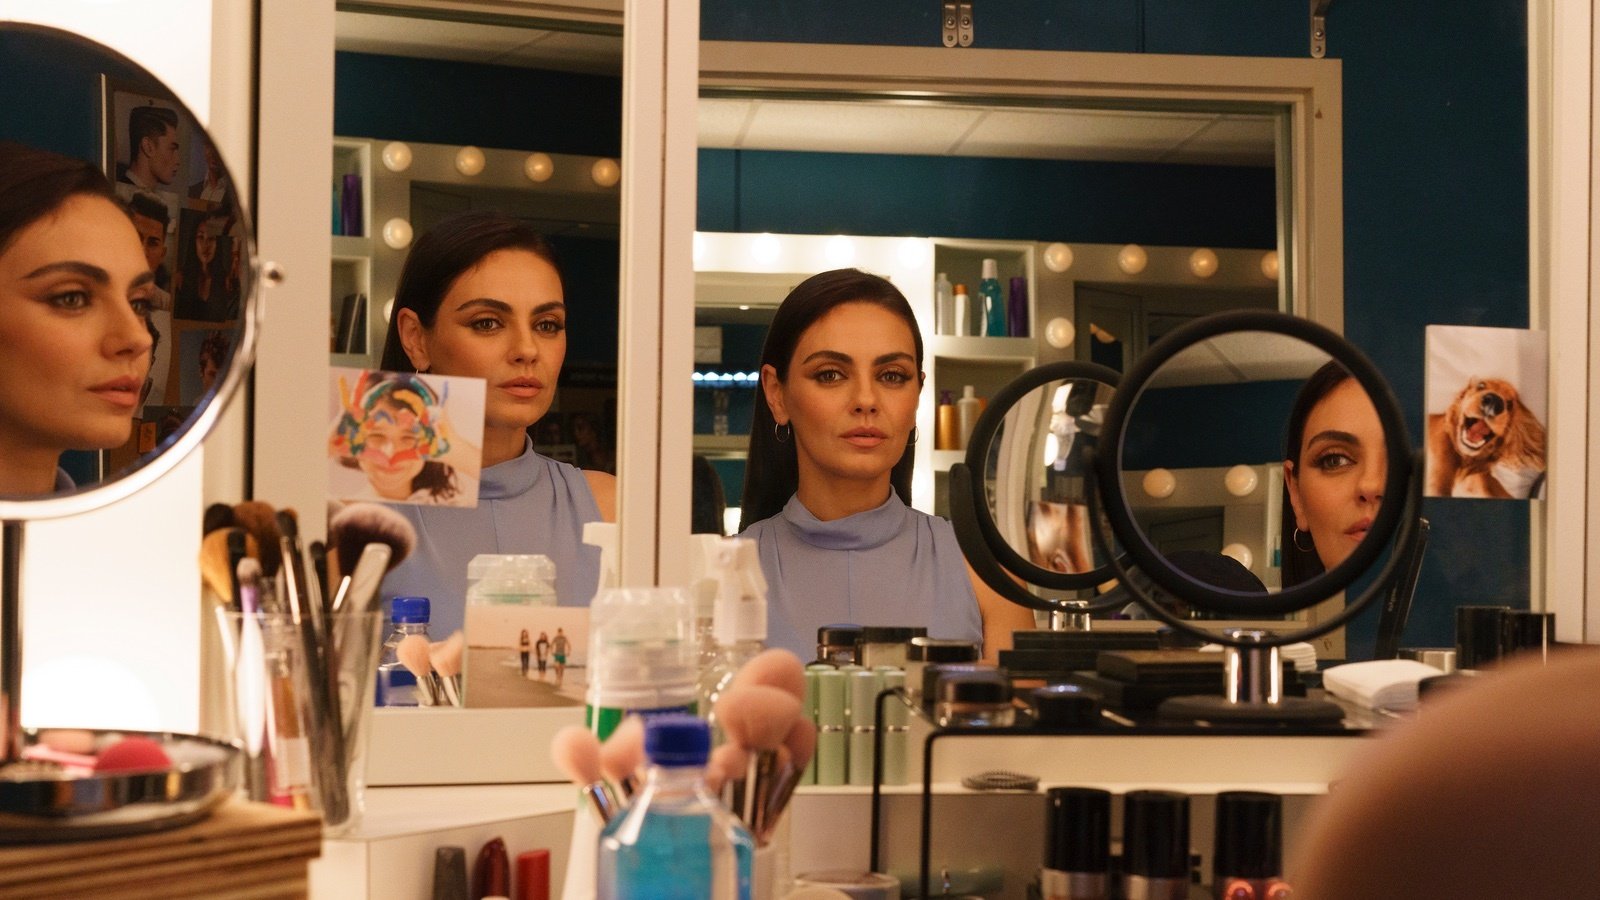 Mila Kunis looks into mirror in latest still from 'Luckiest Girl Alive'